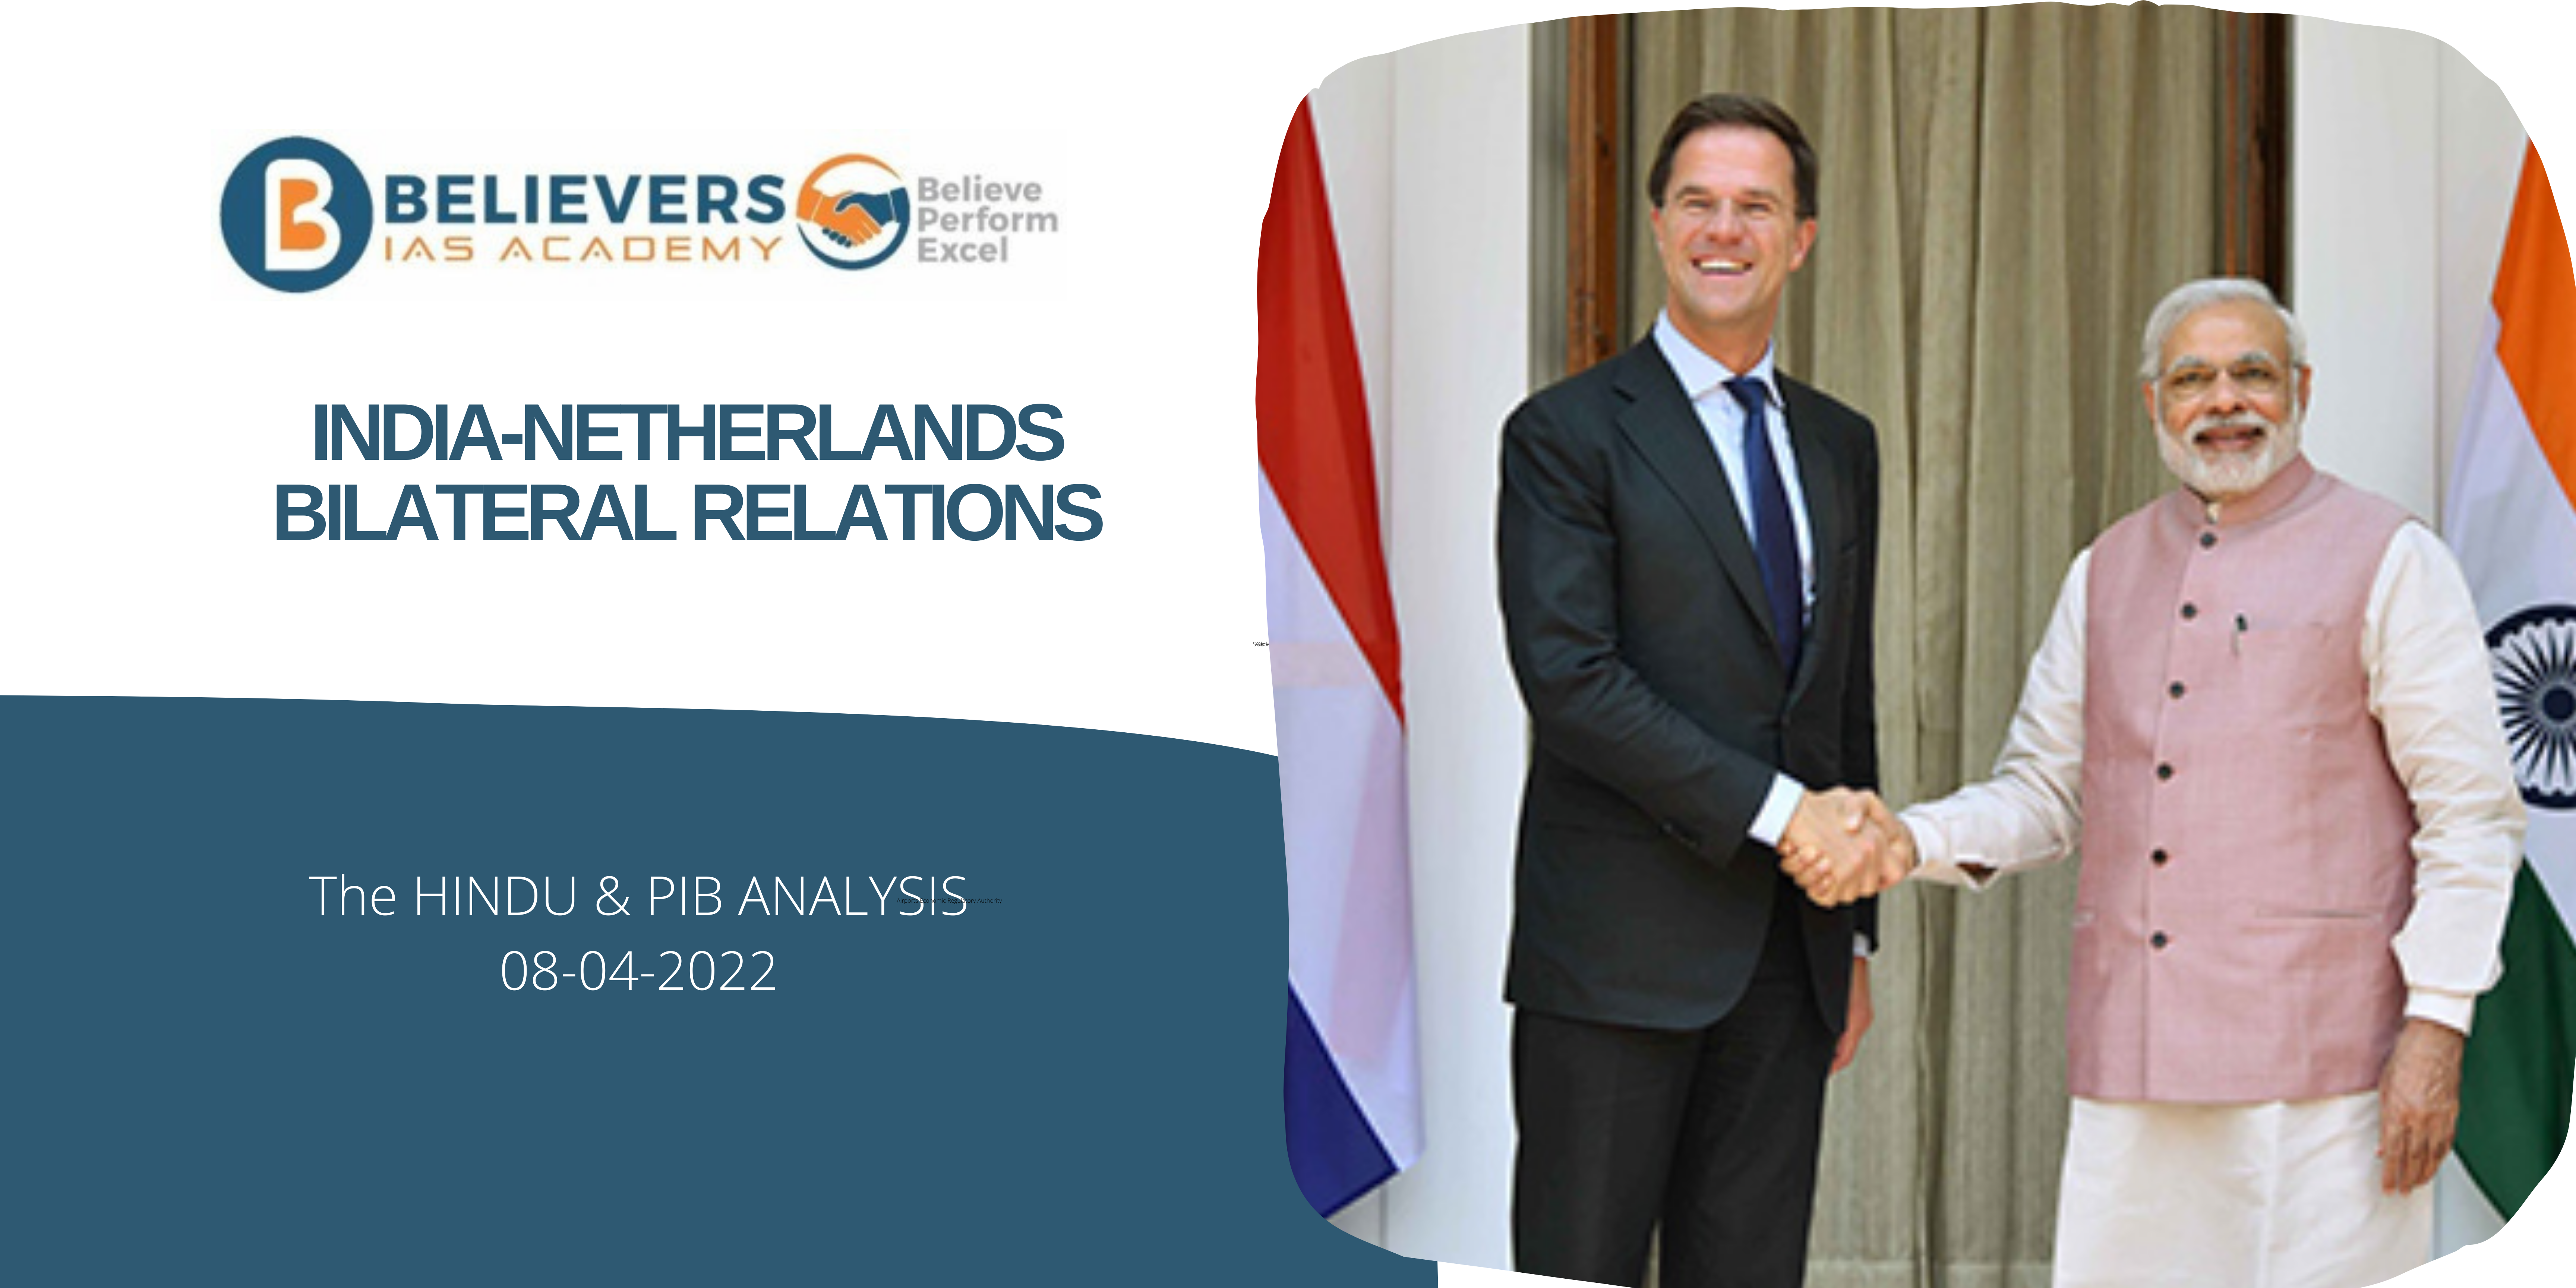 IAS Current affairs - India-Netherlands Bilateral Relations